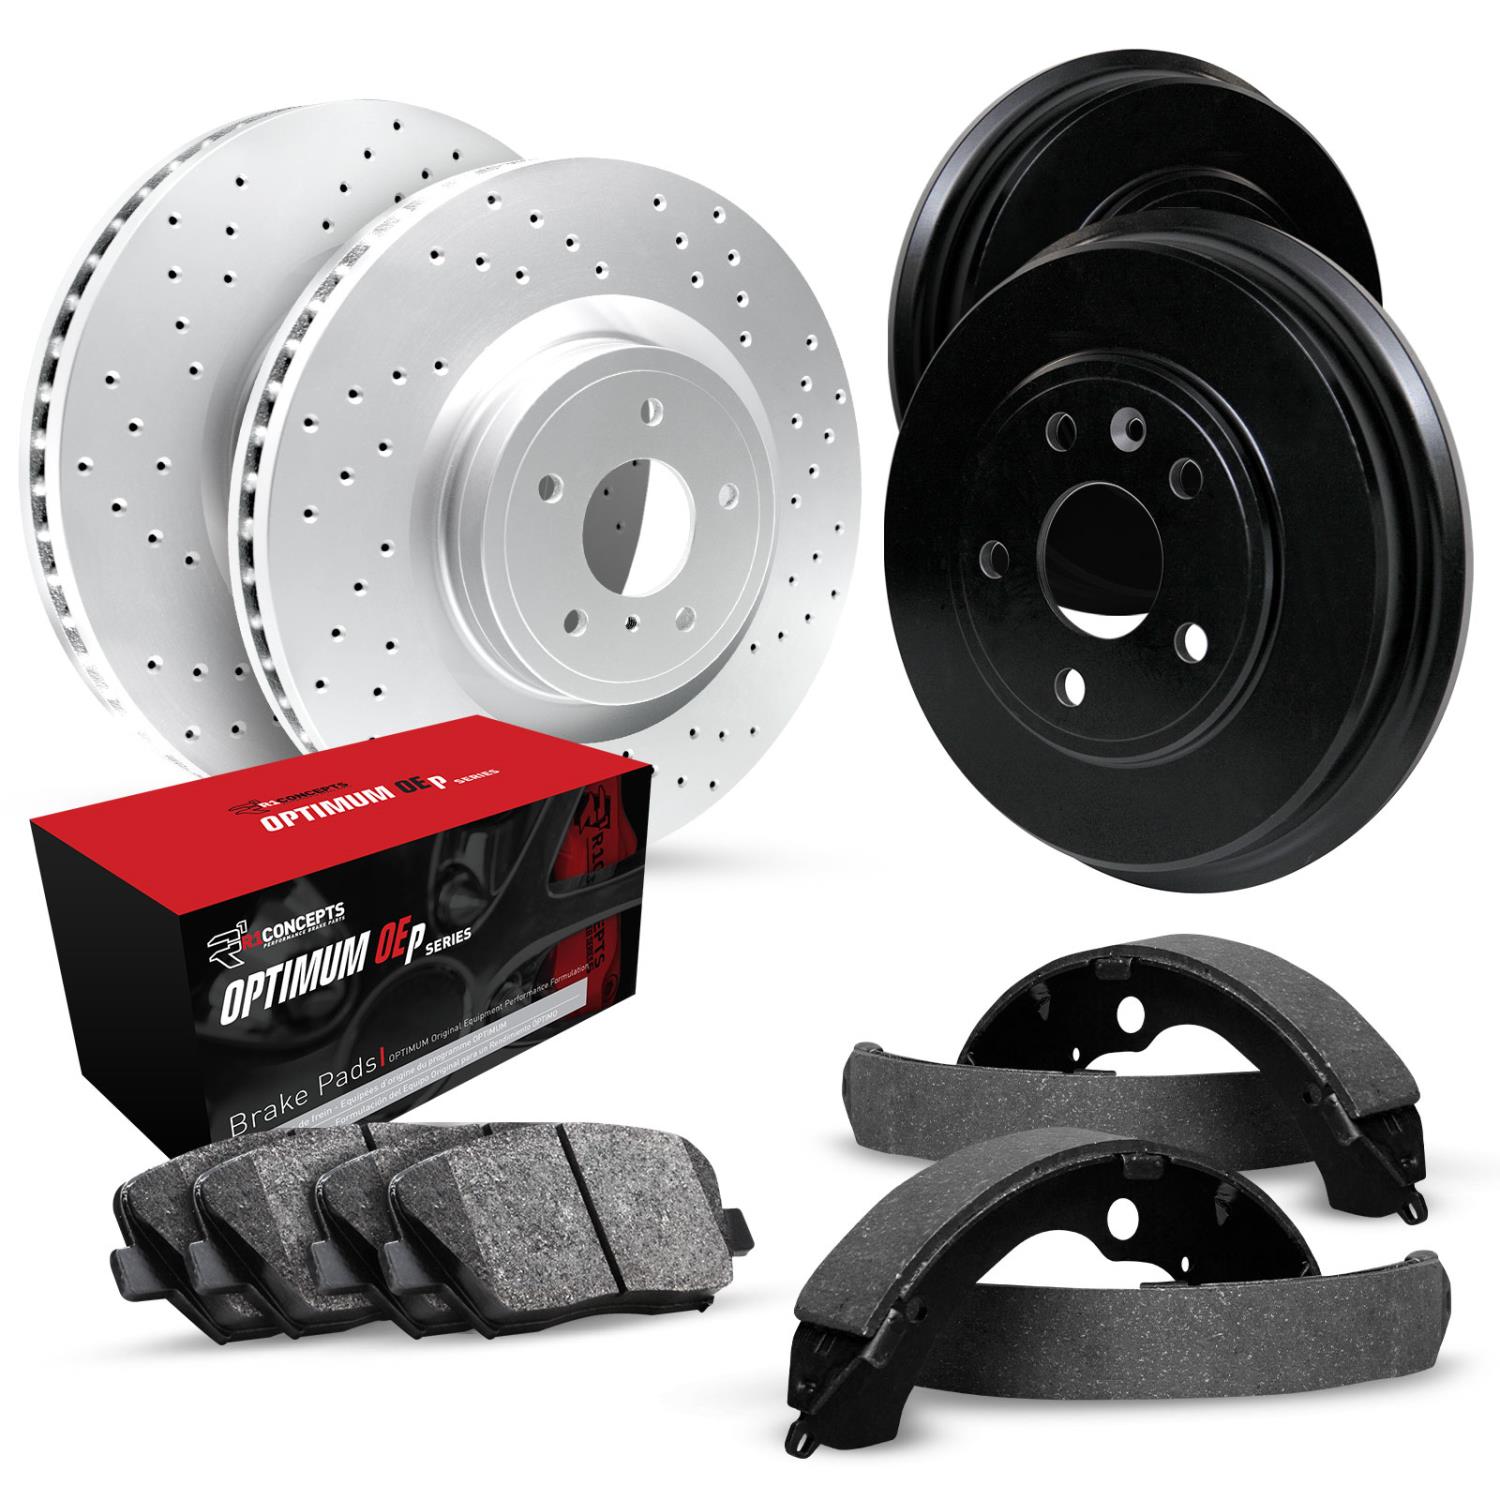 GEO-Carbon Drilled Brake Rotor & Drum Set w/Optimum OE Pads & Shoes, 1992-2001 GM, Position: Front & Rear